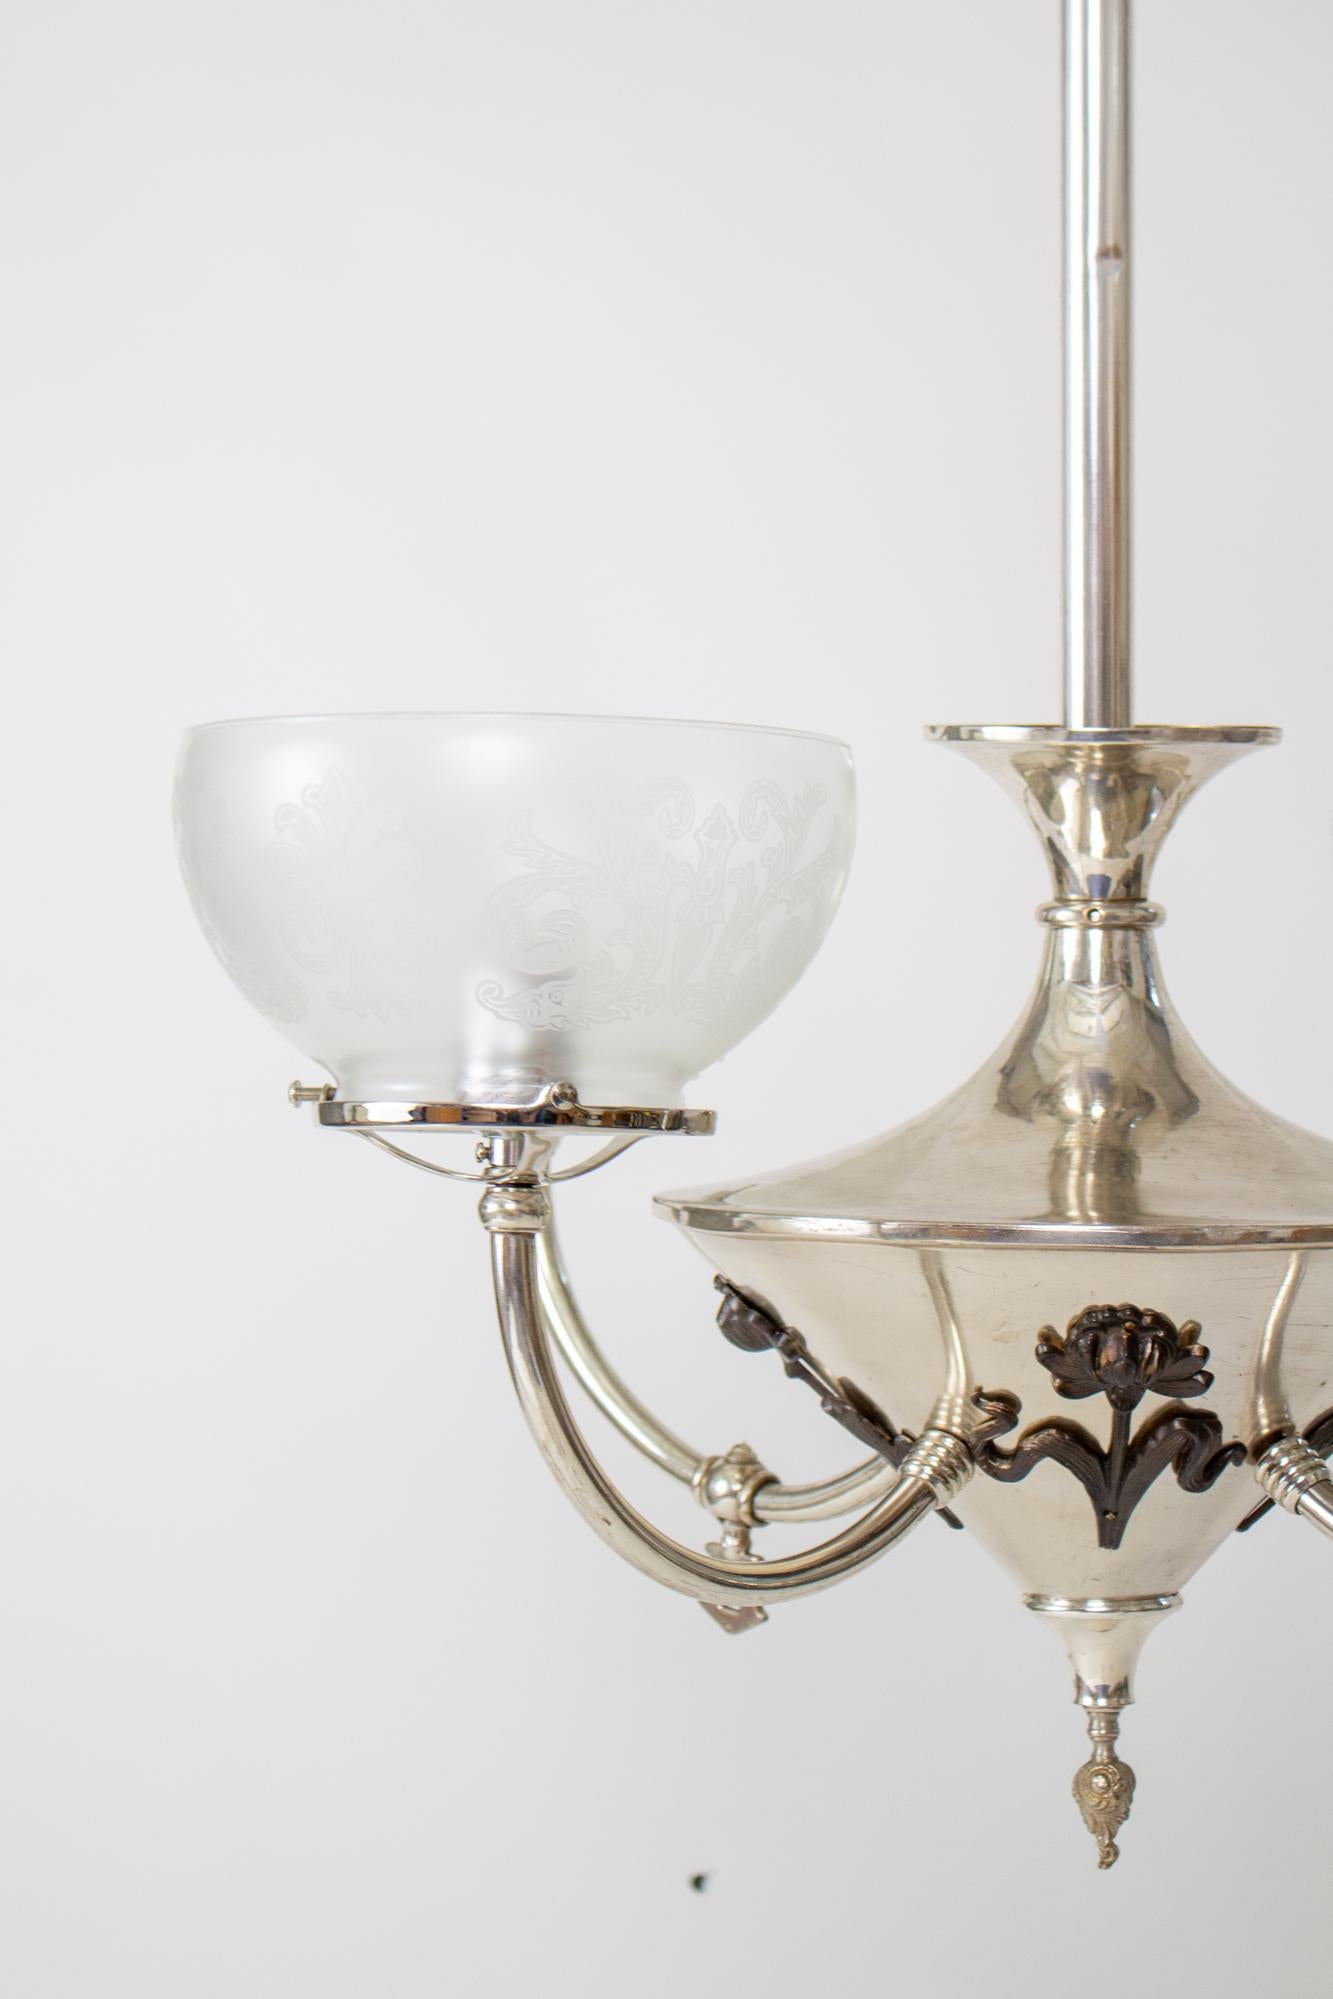 Early 20th Century Four Light Silver Art Nouveau Gas and Electric Chandelier For Sale